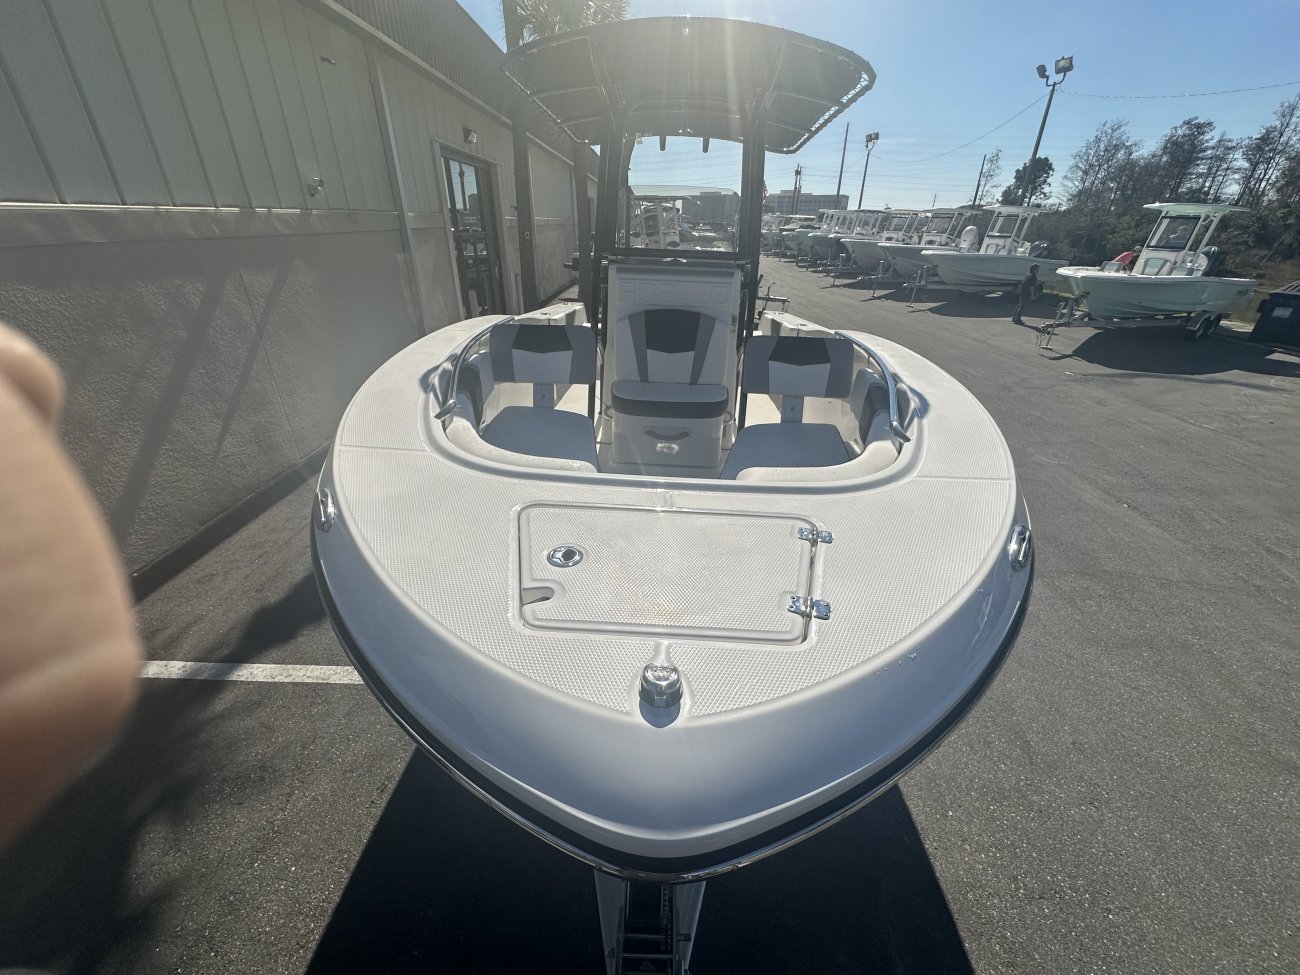 A R200 Center Console is a Power and could be classed as a Center Console, Freshwater Fishing, High Performance, Saltwater Fishing, Runabout,  or, just an overall Great Boat!